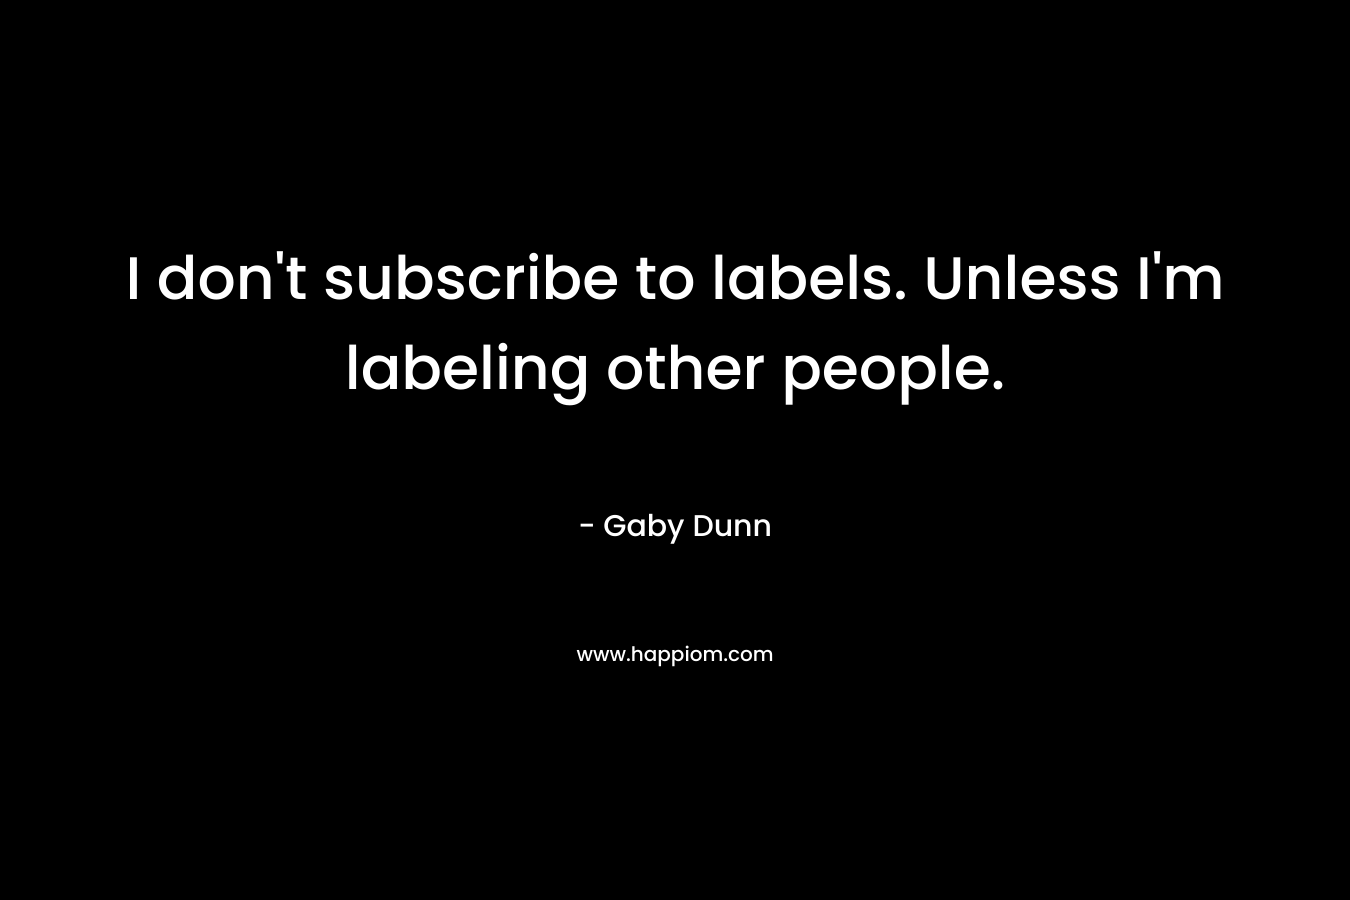 I don’t subscribe to labels. Unless I’m labeling other people. – Gaby Dunn